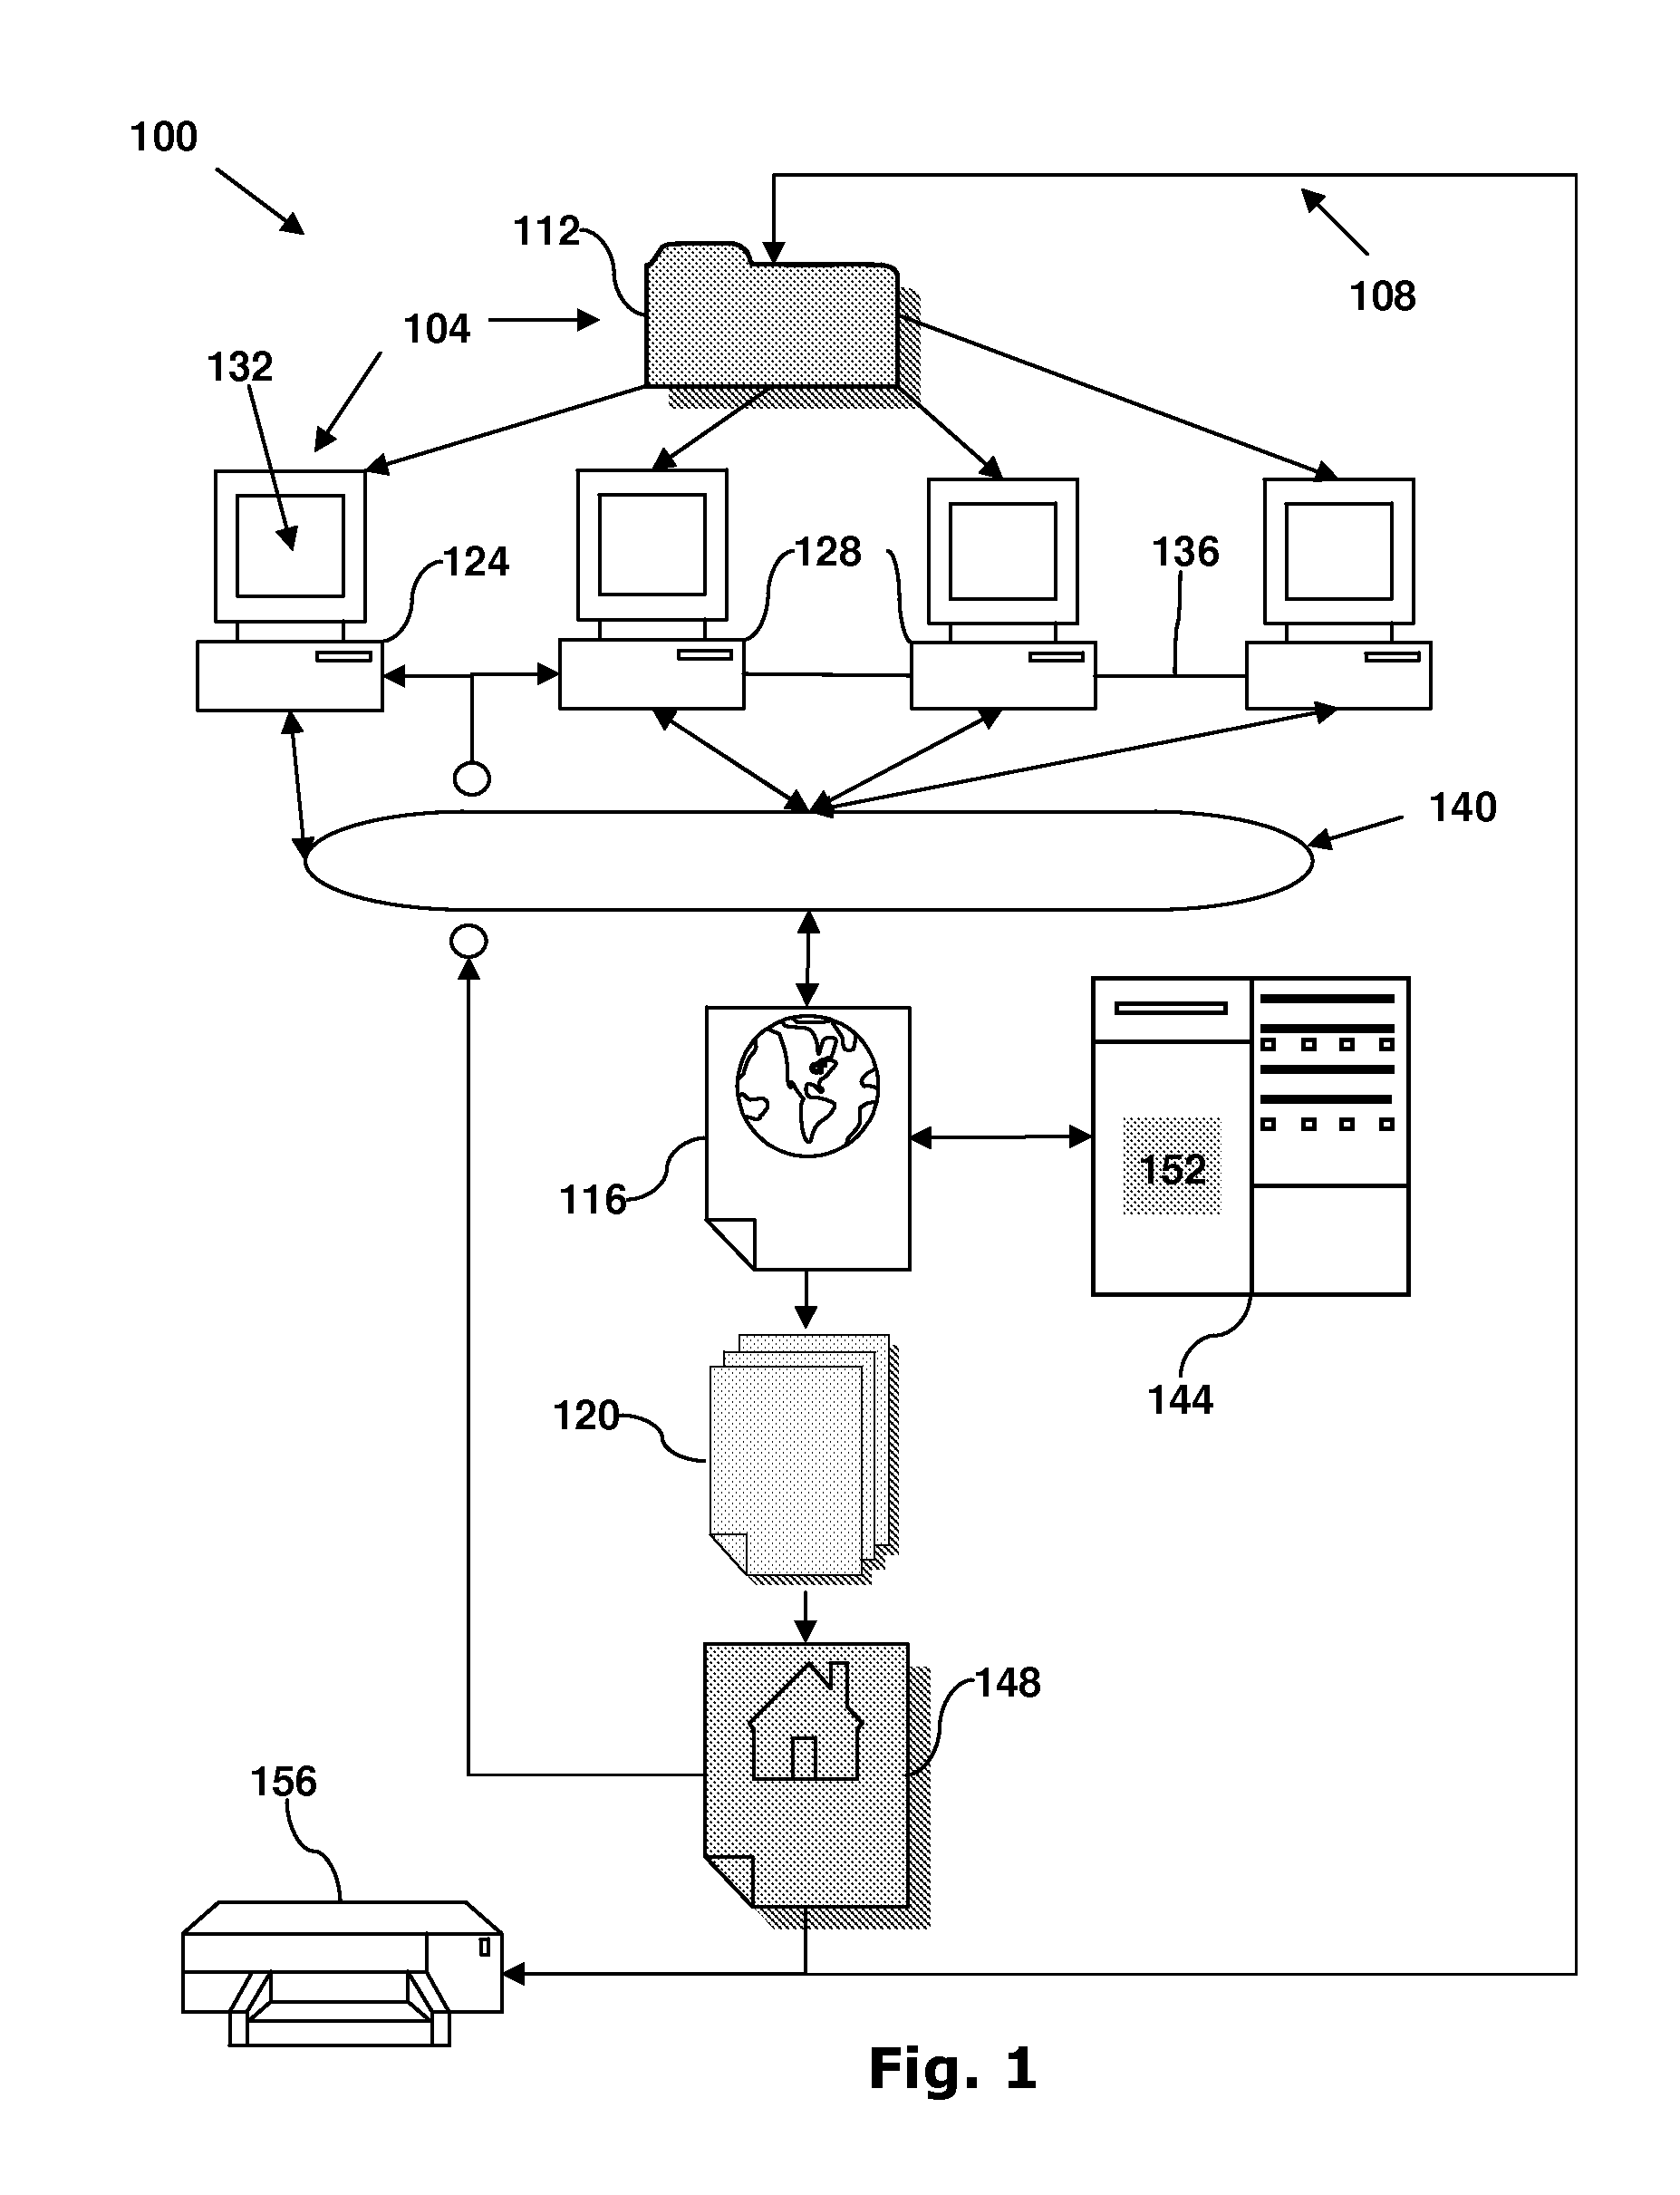 Apparatus and method of workers' compensation cost management and quality control